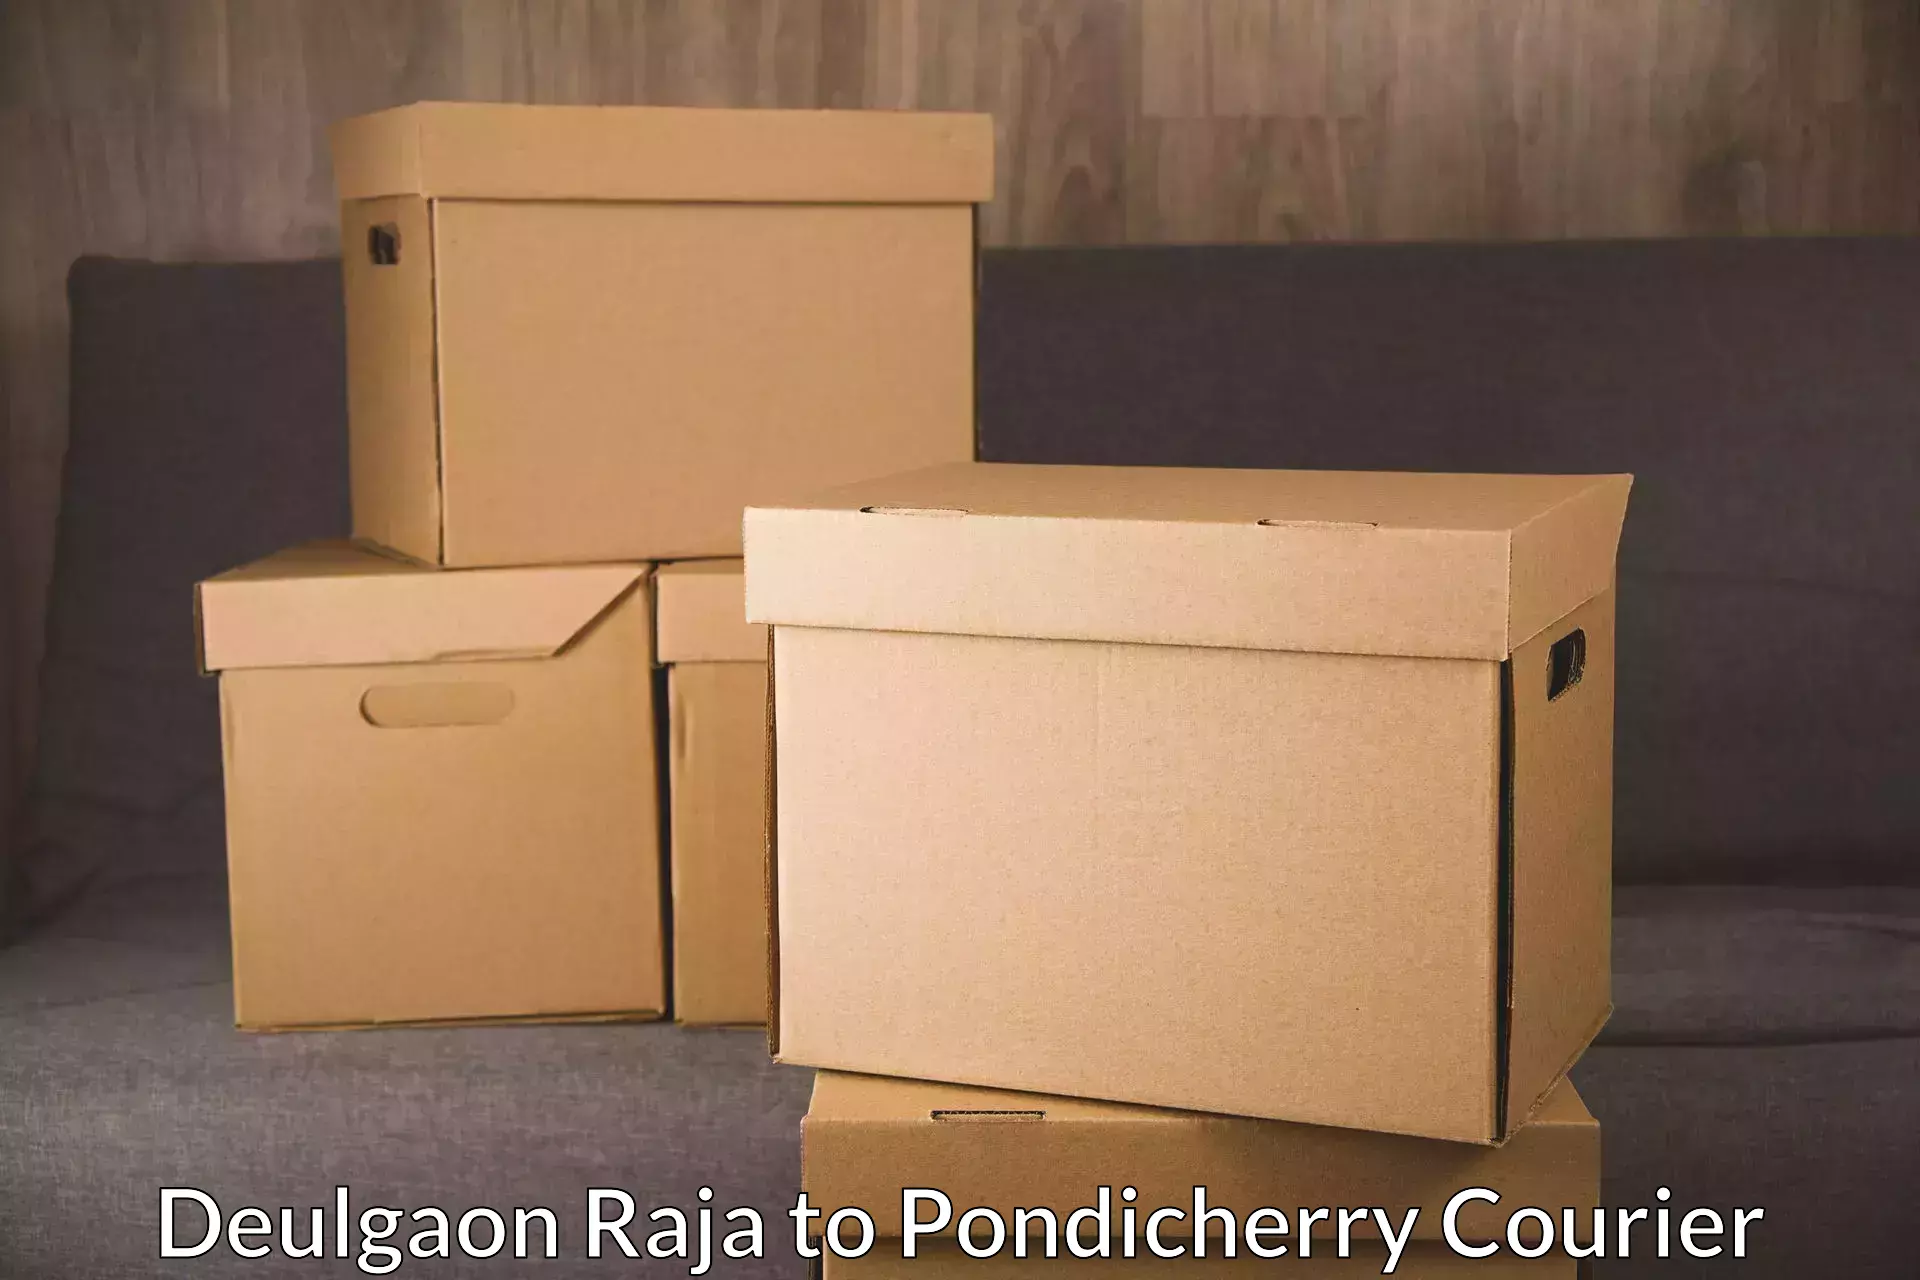 High-capacity courier solutions Deulgaon Raja to Pondicherry